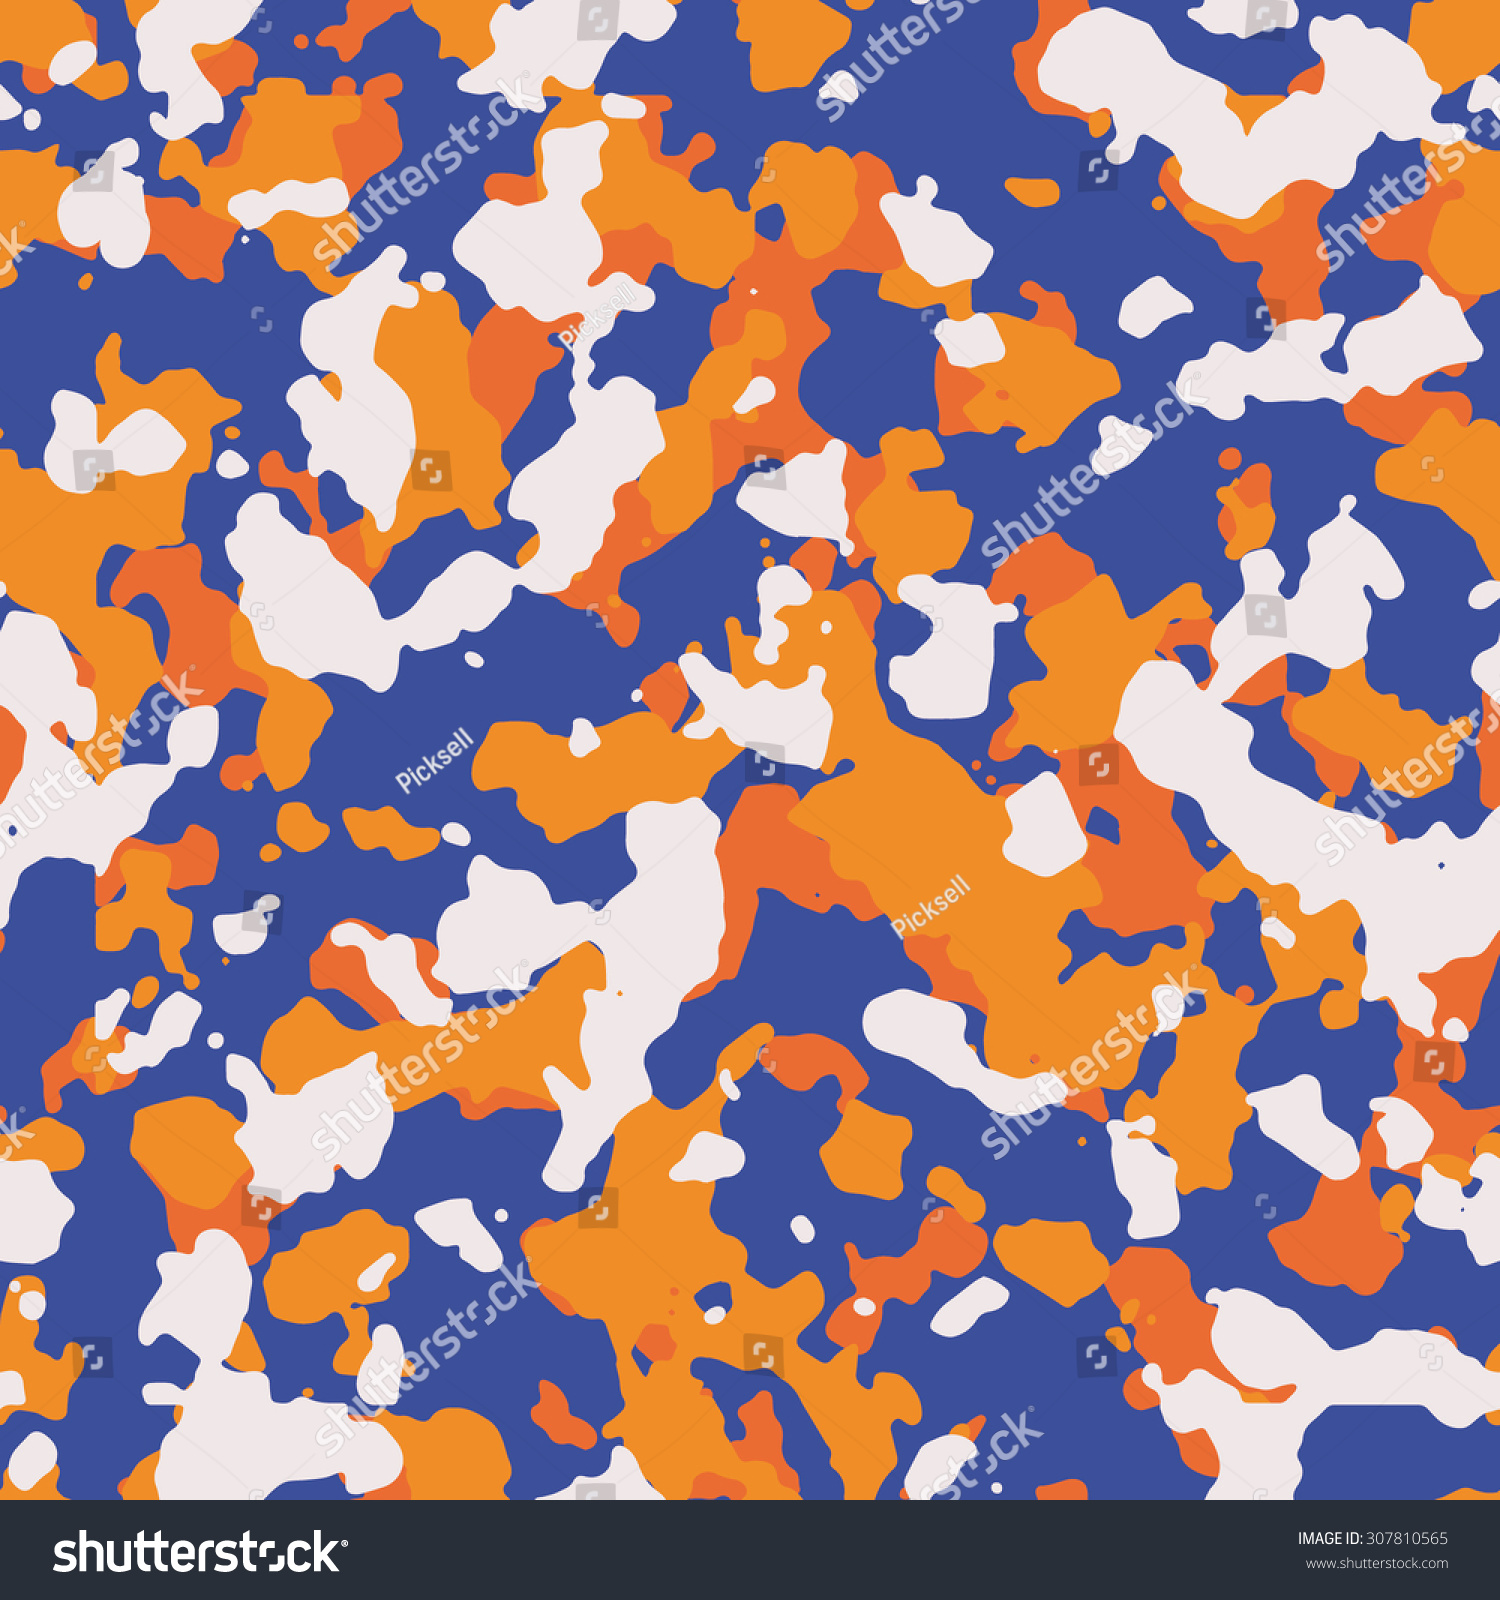 camouflage clipart background - photo #45